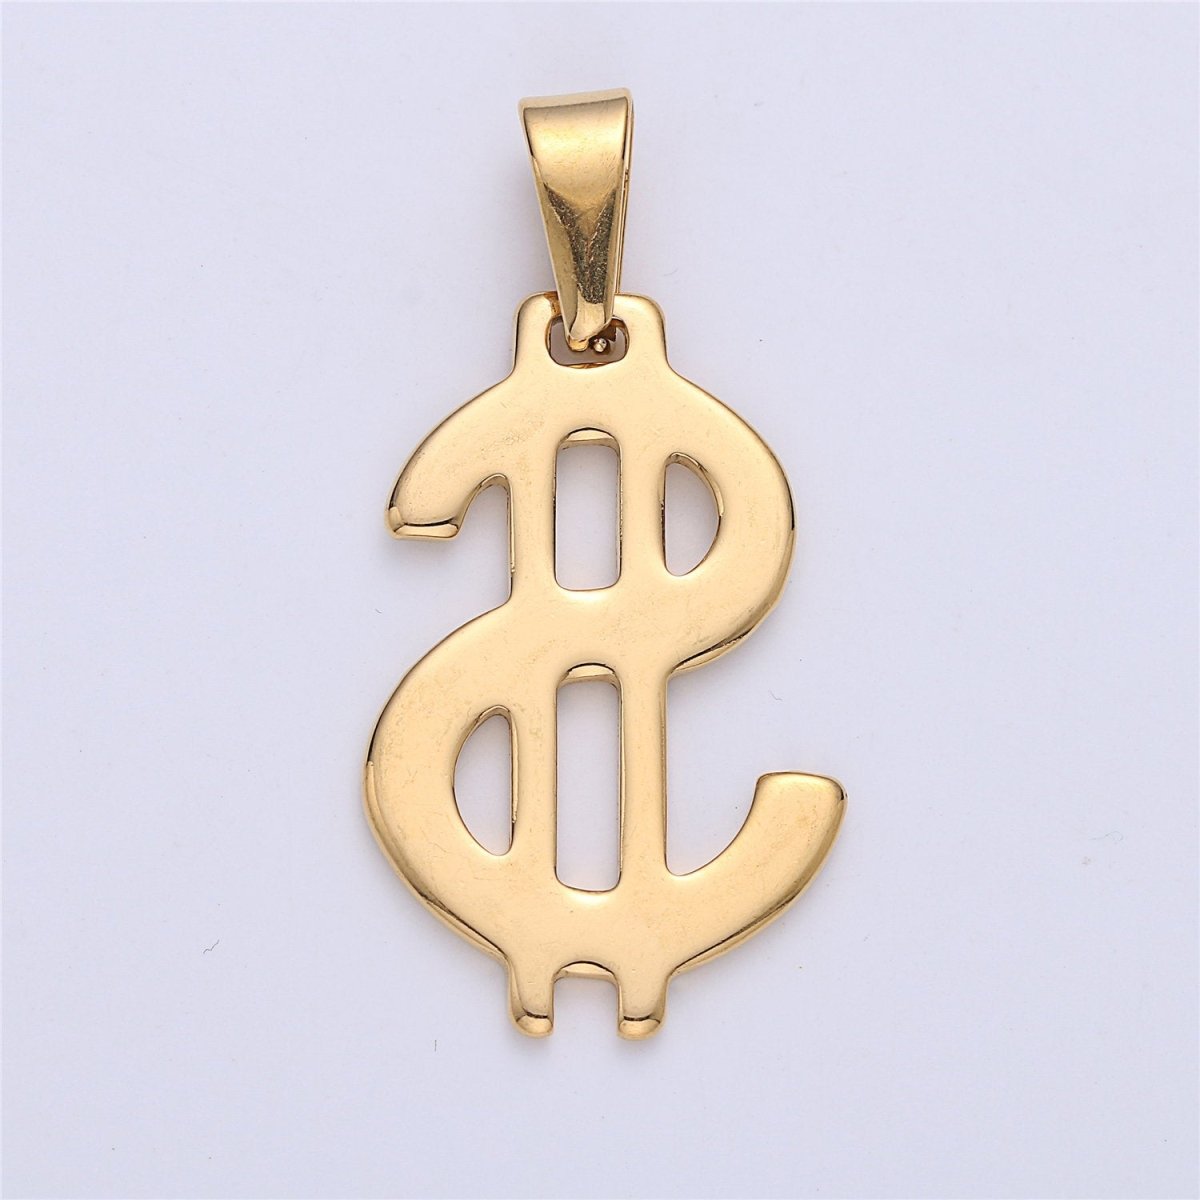 Gold Filled Stainless Steel Dollar Sign, Golden US Dollar Currency, Necklace Pendant Charm Bead Bails Findings for Jewelry Making J-666 - DLUXCA